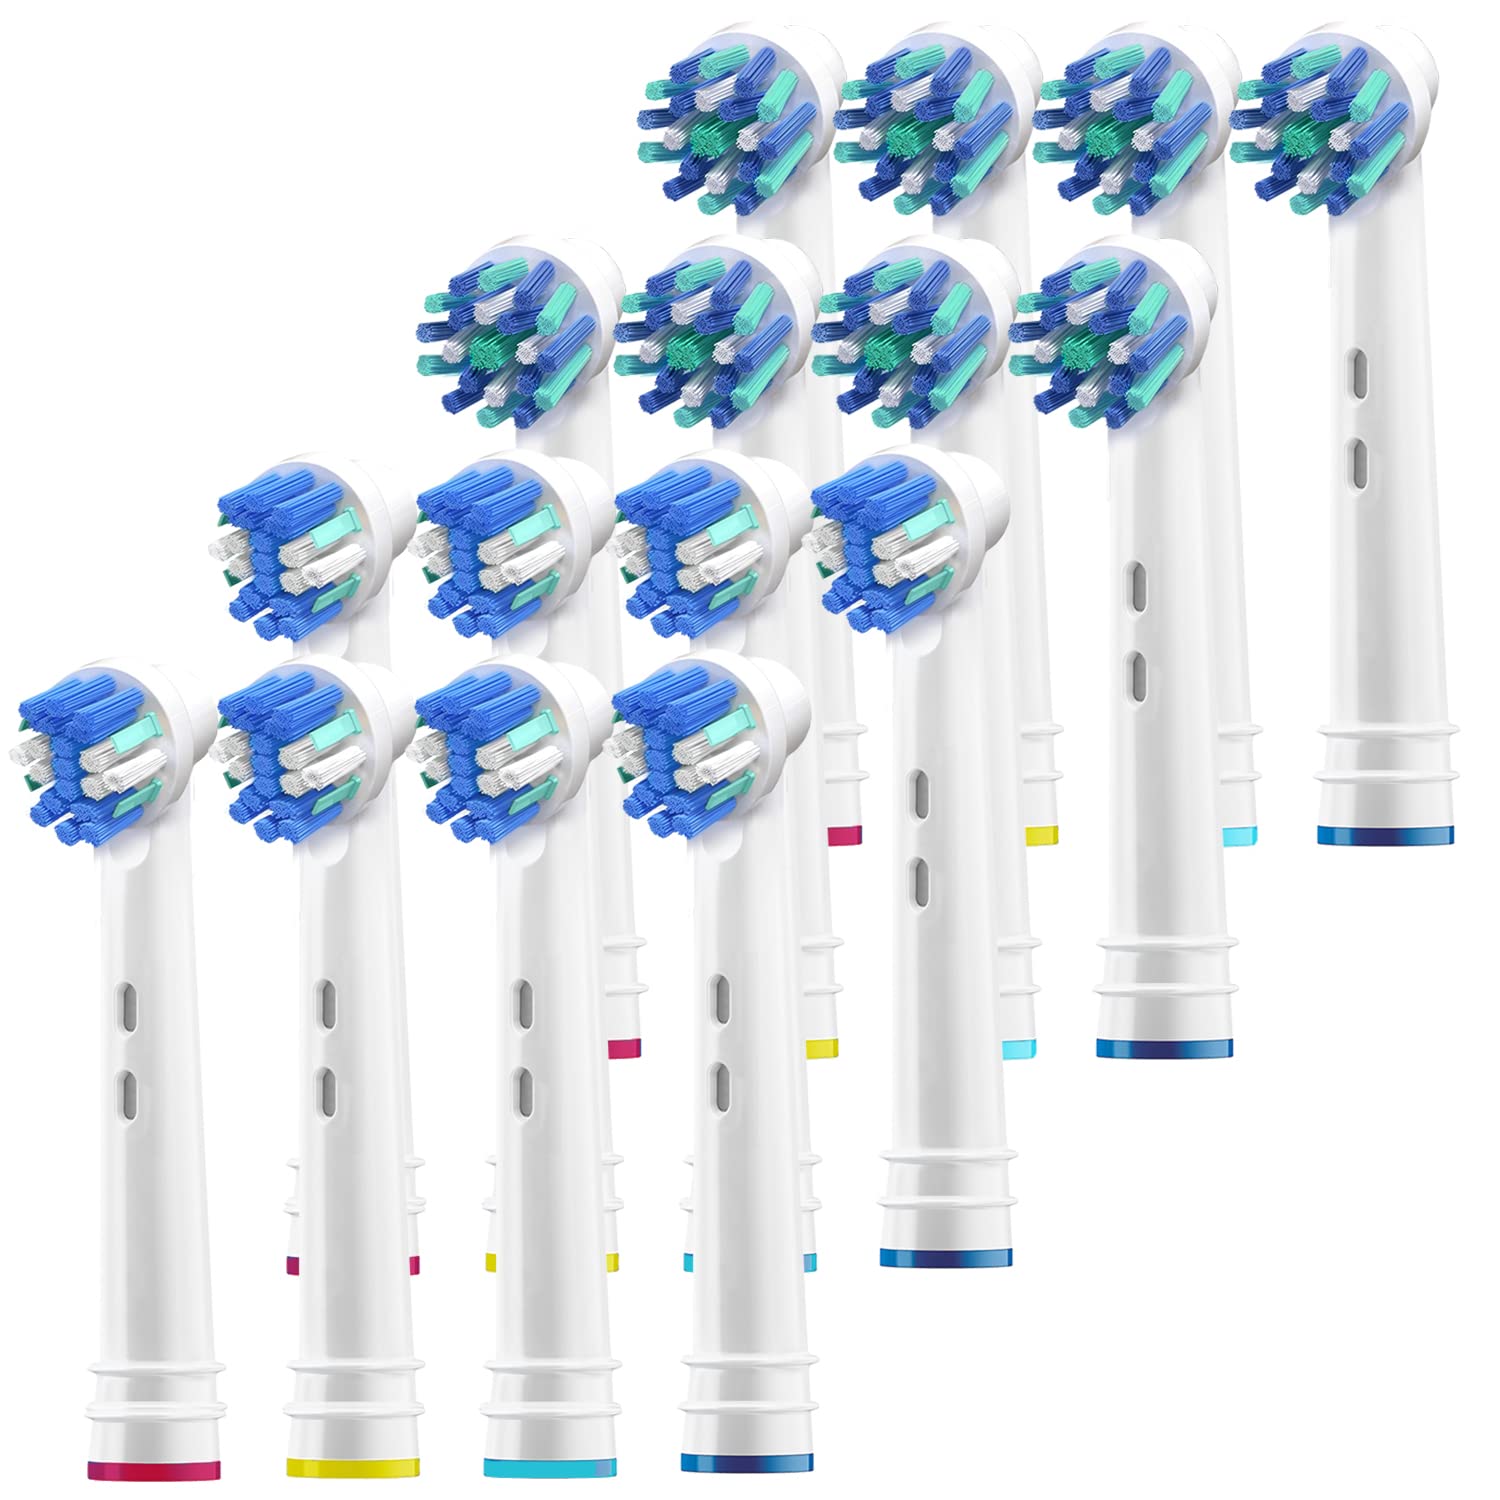 Replacement Brush Heads Compatible with Oral B Braun Electric Toothbrush-  16 Pk of Generic Assorted Brushes for Oralb- 8 Cross & 8 Floss- Fits Oral-b  Pro 1000 Vitality Triumph Kids + More!